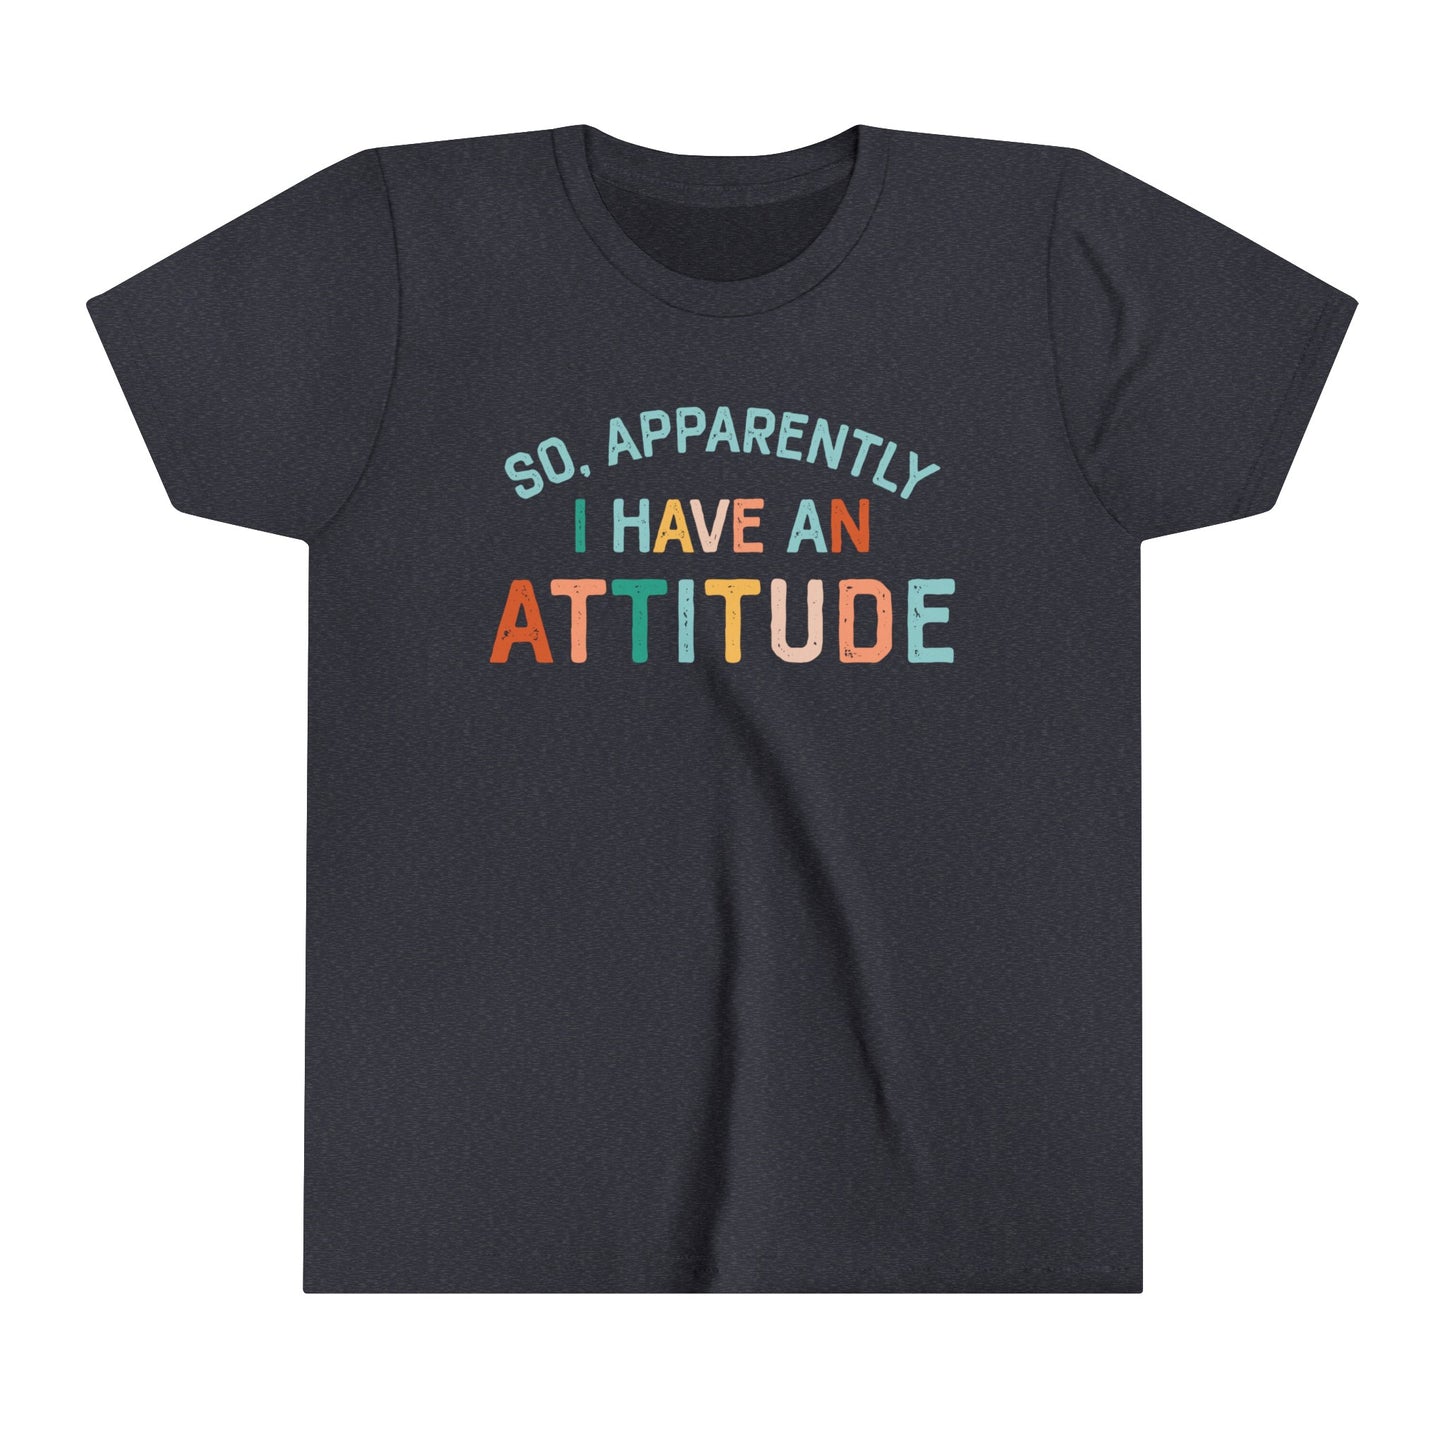 So Apparently I Have An Attitude  Girl's Youth Funny Short Sleeve Shirt